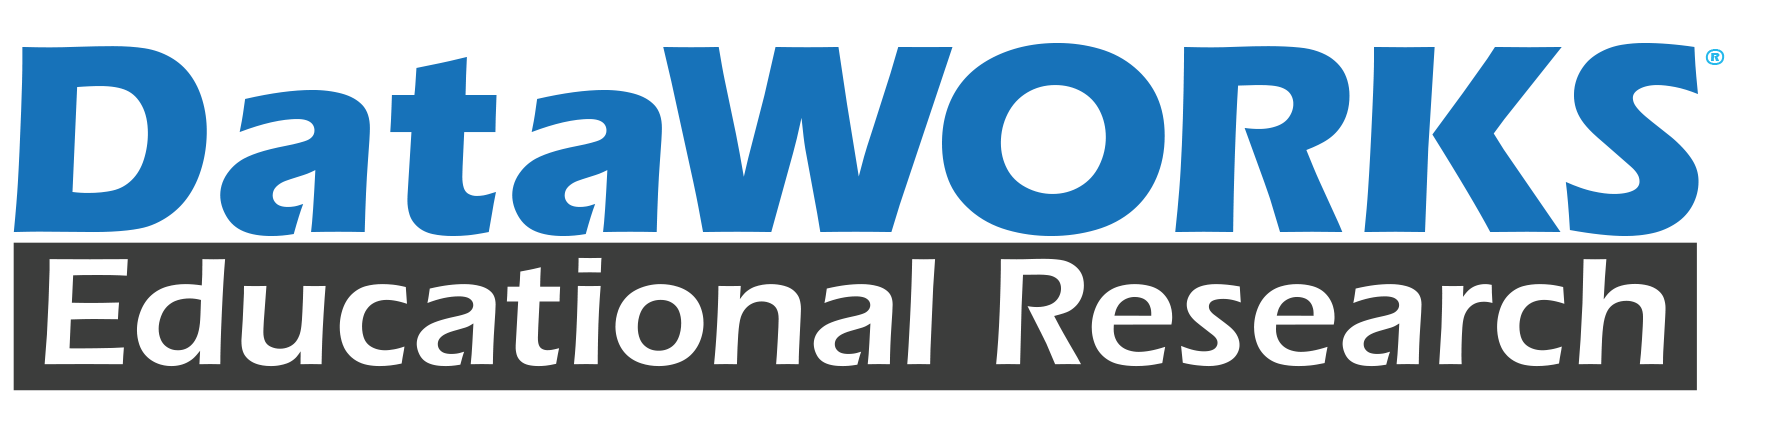 DataWORKS Educational Research's Logo